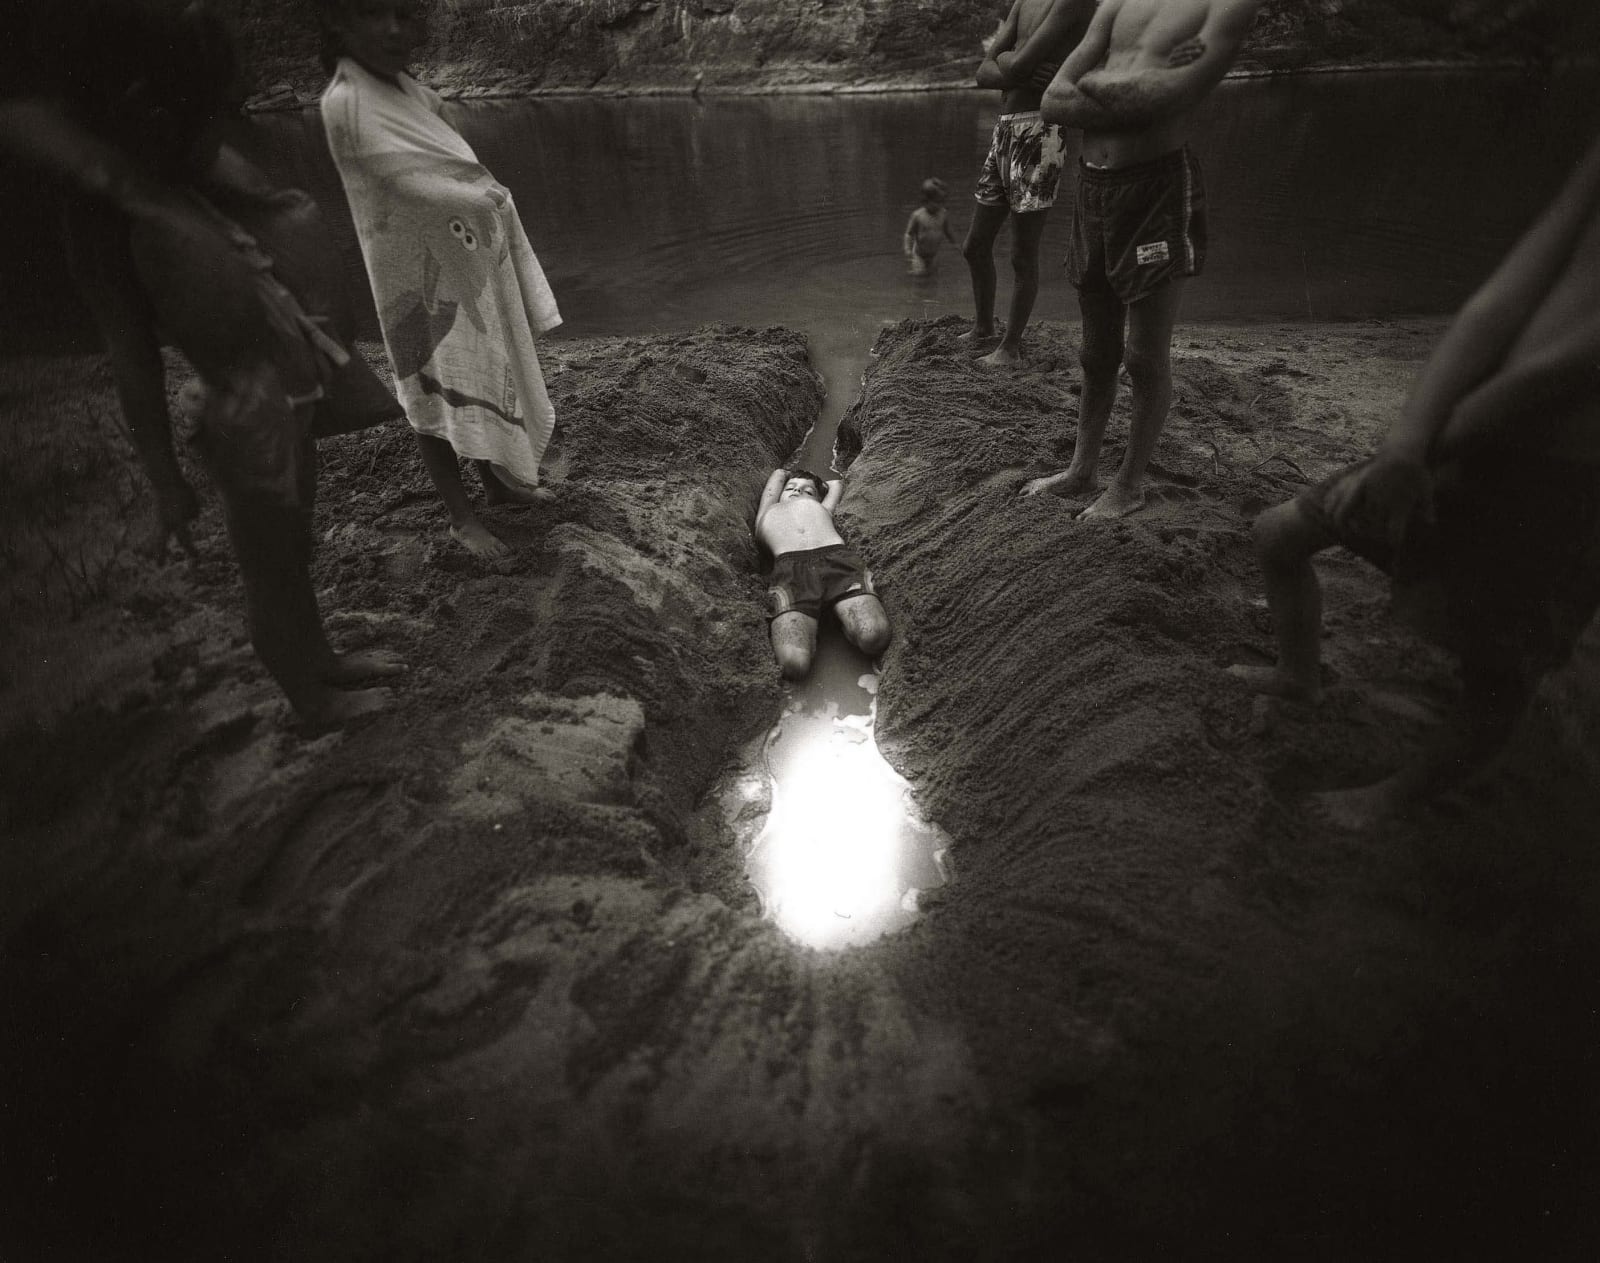 Emmett laying in a ditch filled with glowing water, from the Immediate Family series, by Sally Mann